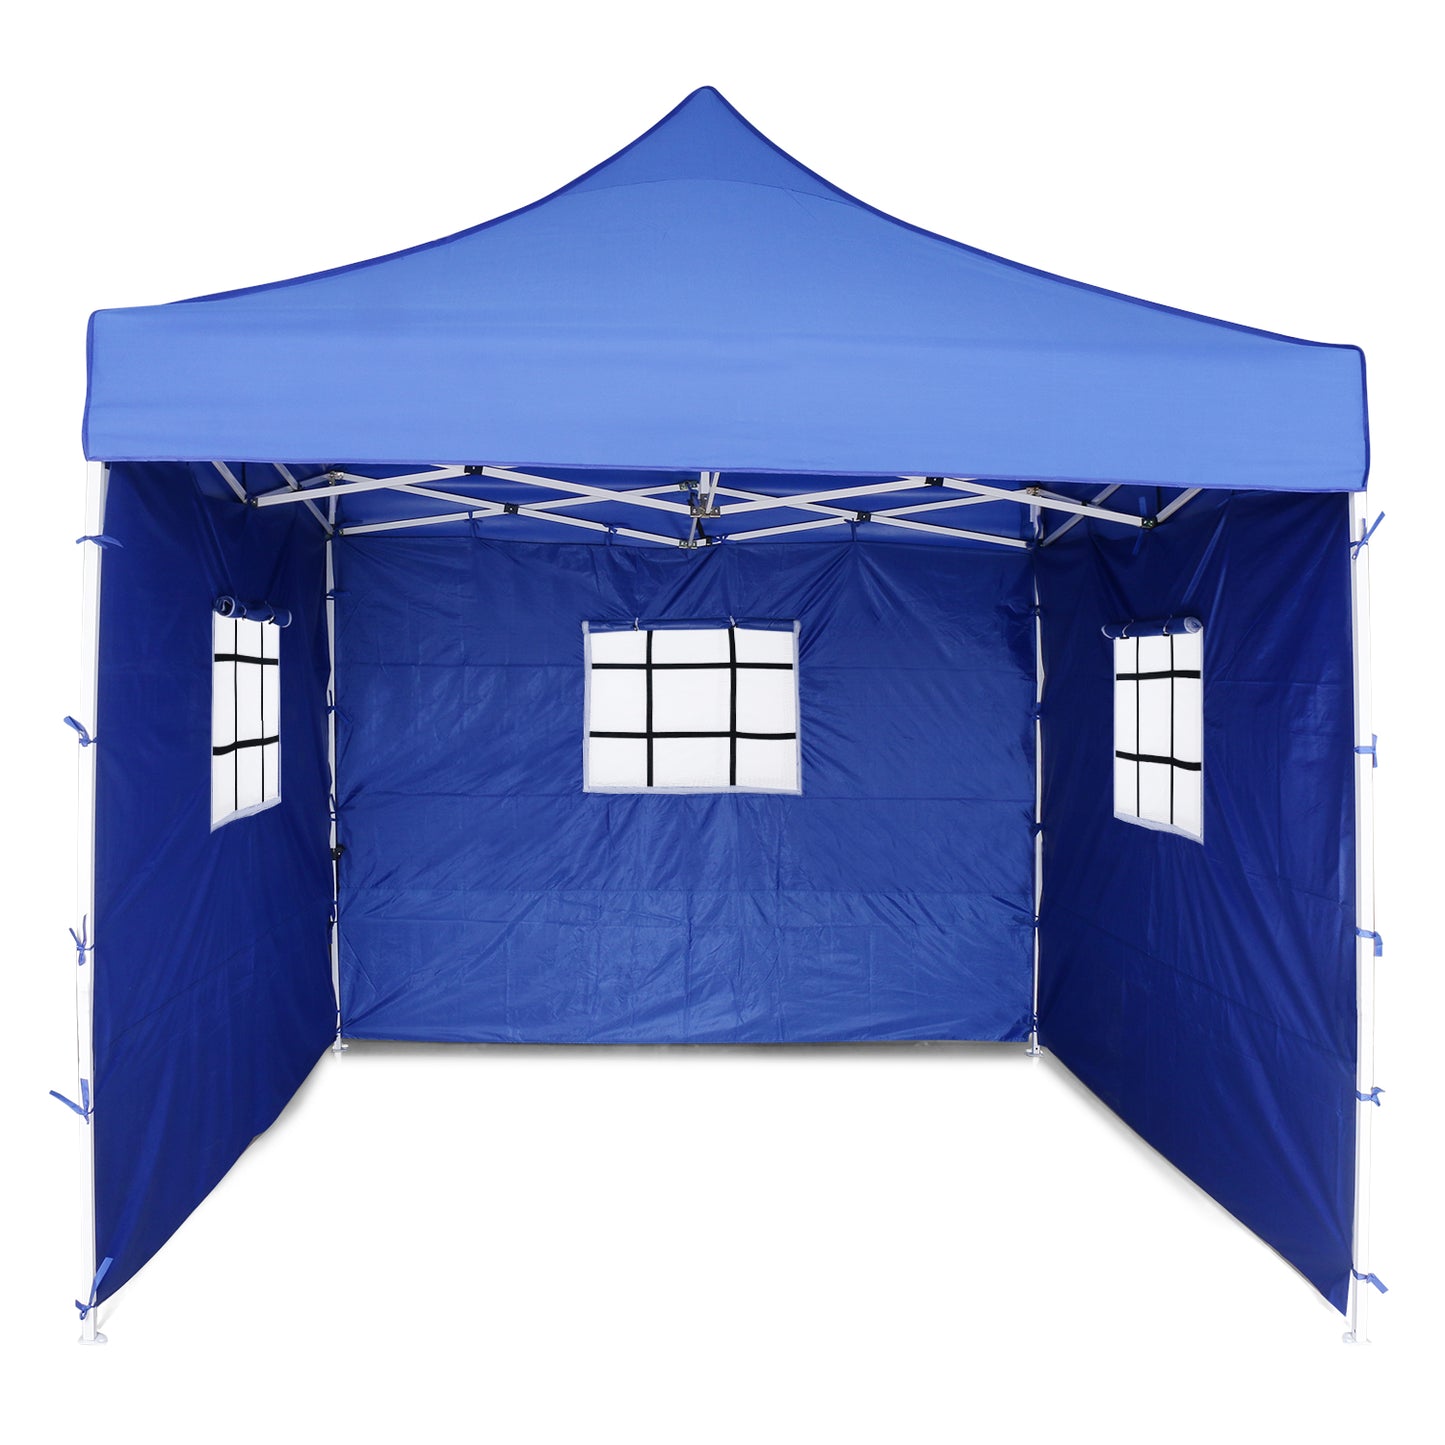 Gazebo Tent 10 x 10 feet with Netted Window side covers - Premium Quality